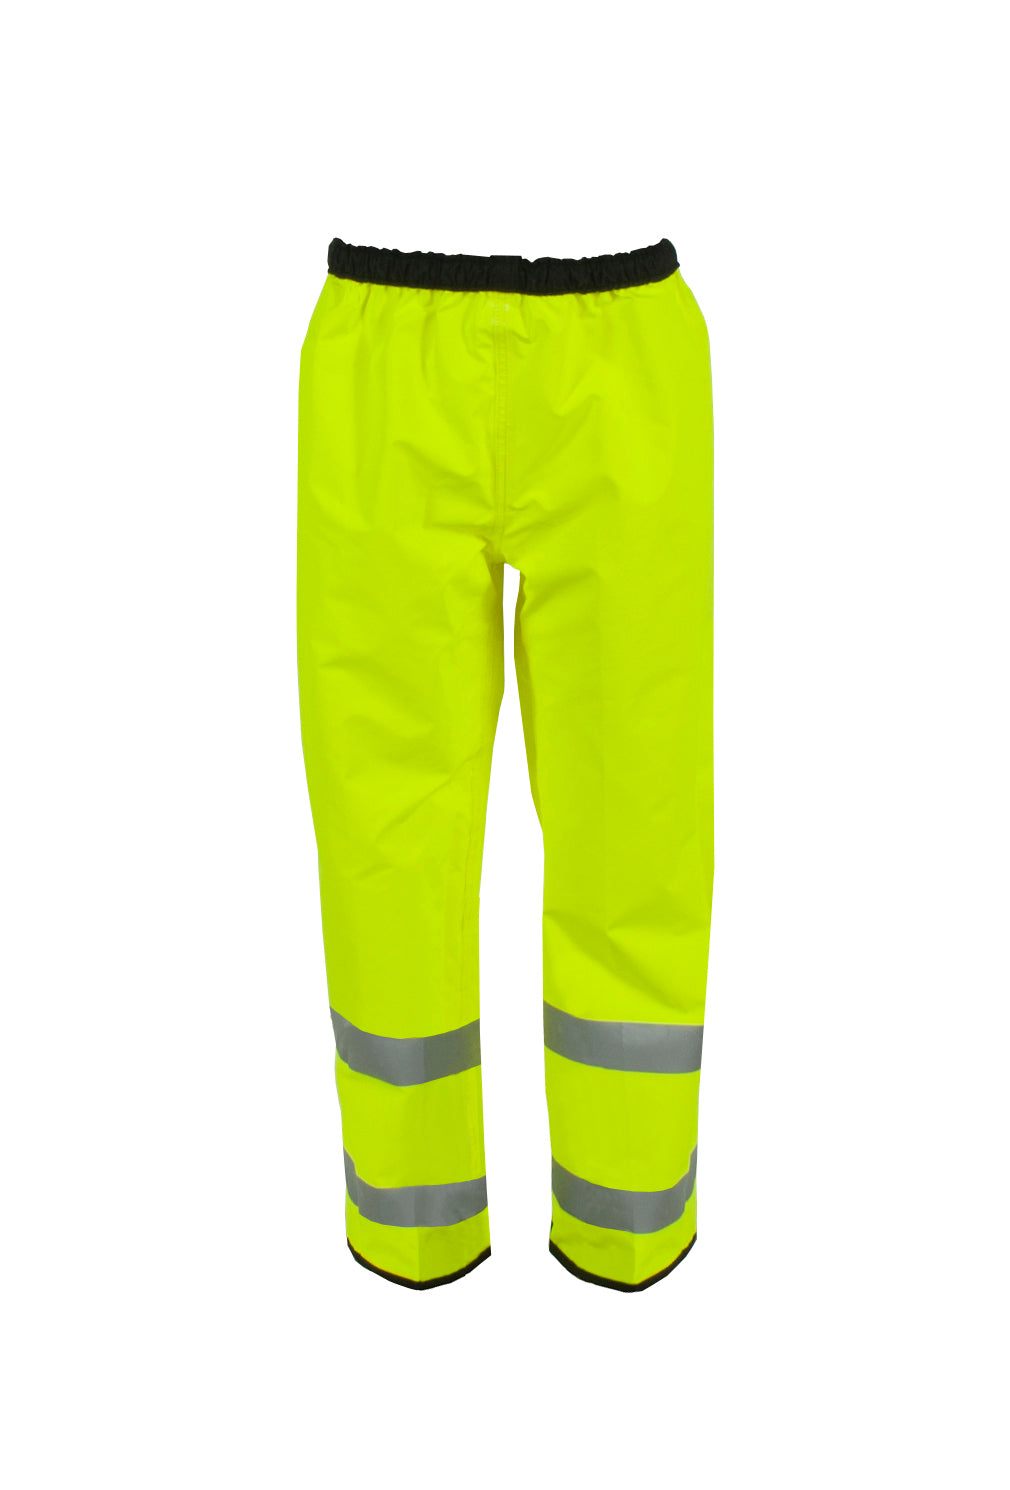 Neese 4703RET Safe Officer Reversible Trouser-eSafety Supplies, Inc